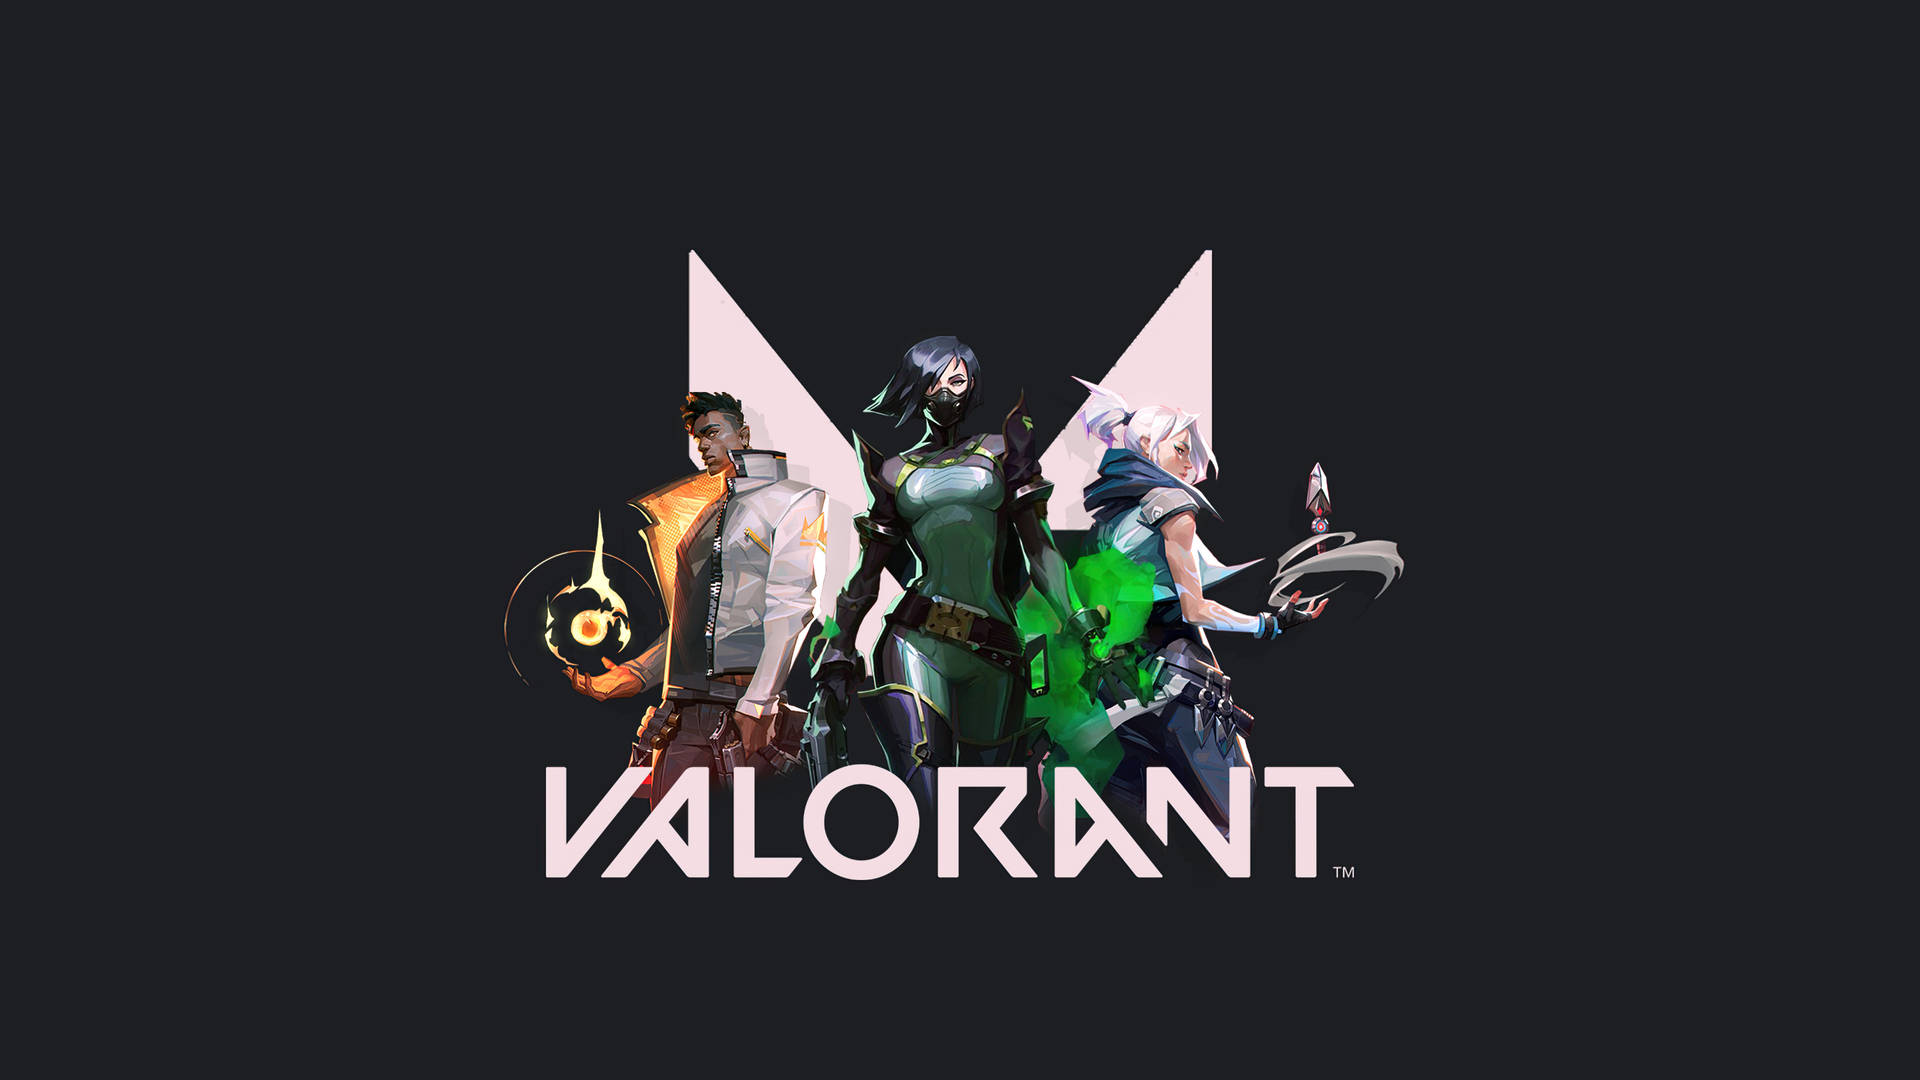 Combining Fire And Poison, Phoenix And Viper Are Powerful Agents In The Valorant Universe. Background